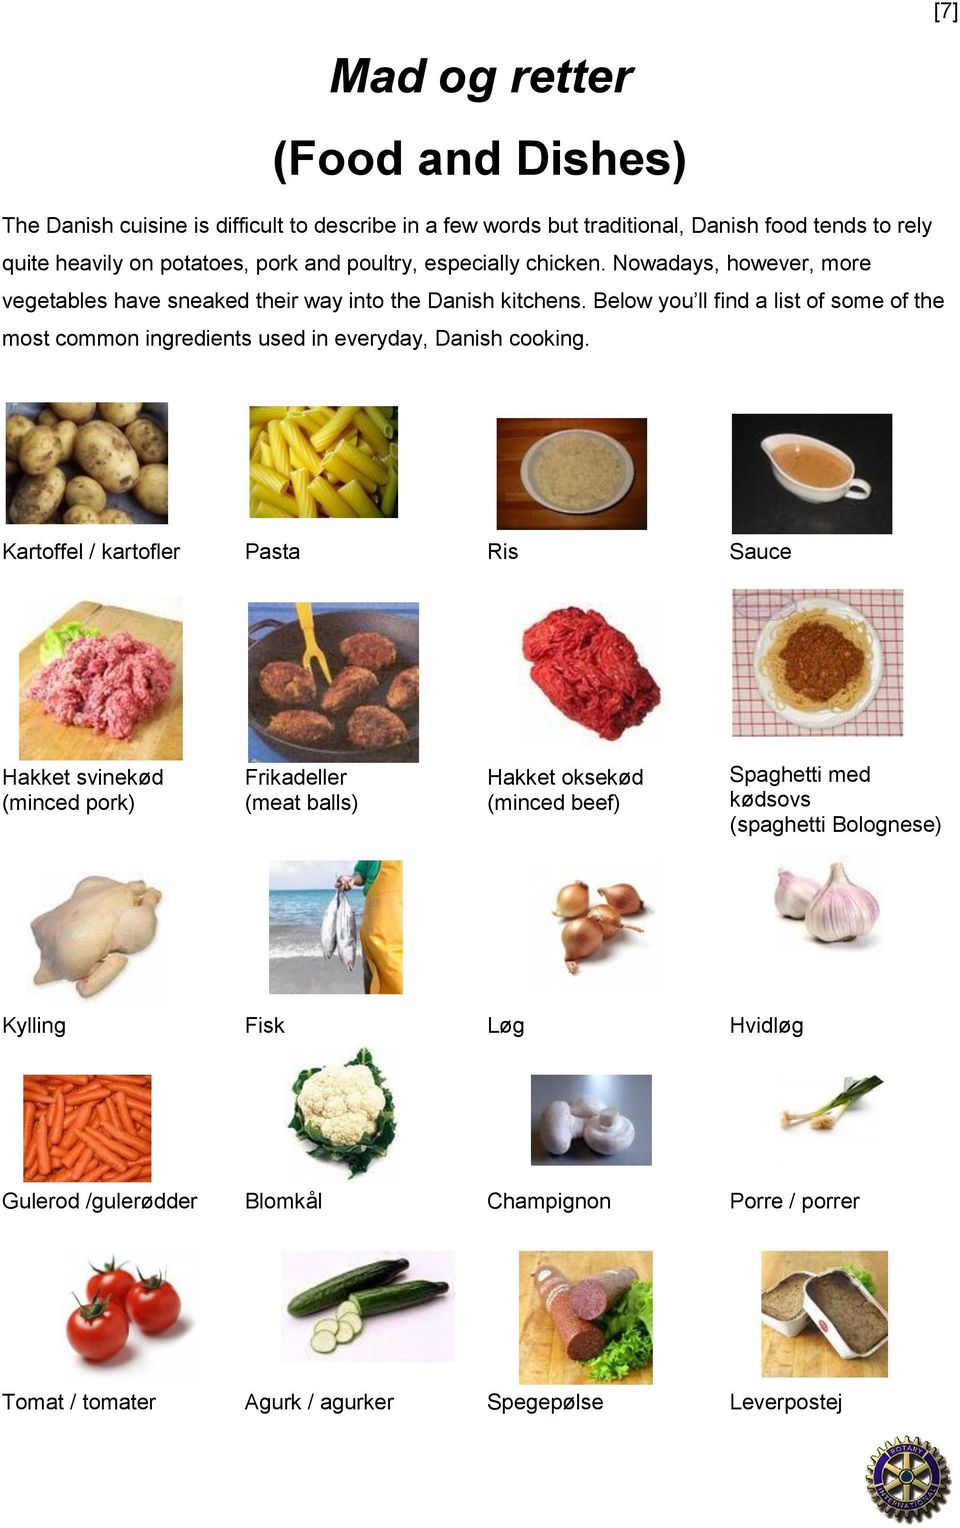 Below you ll find a list of some of the most common ingredients used in everyday, Danish cooking.